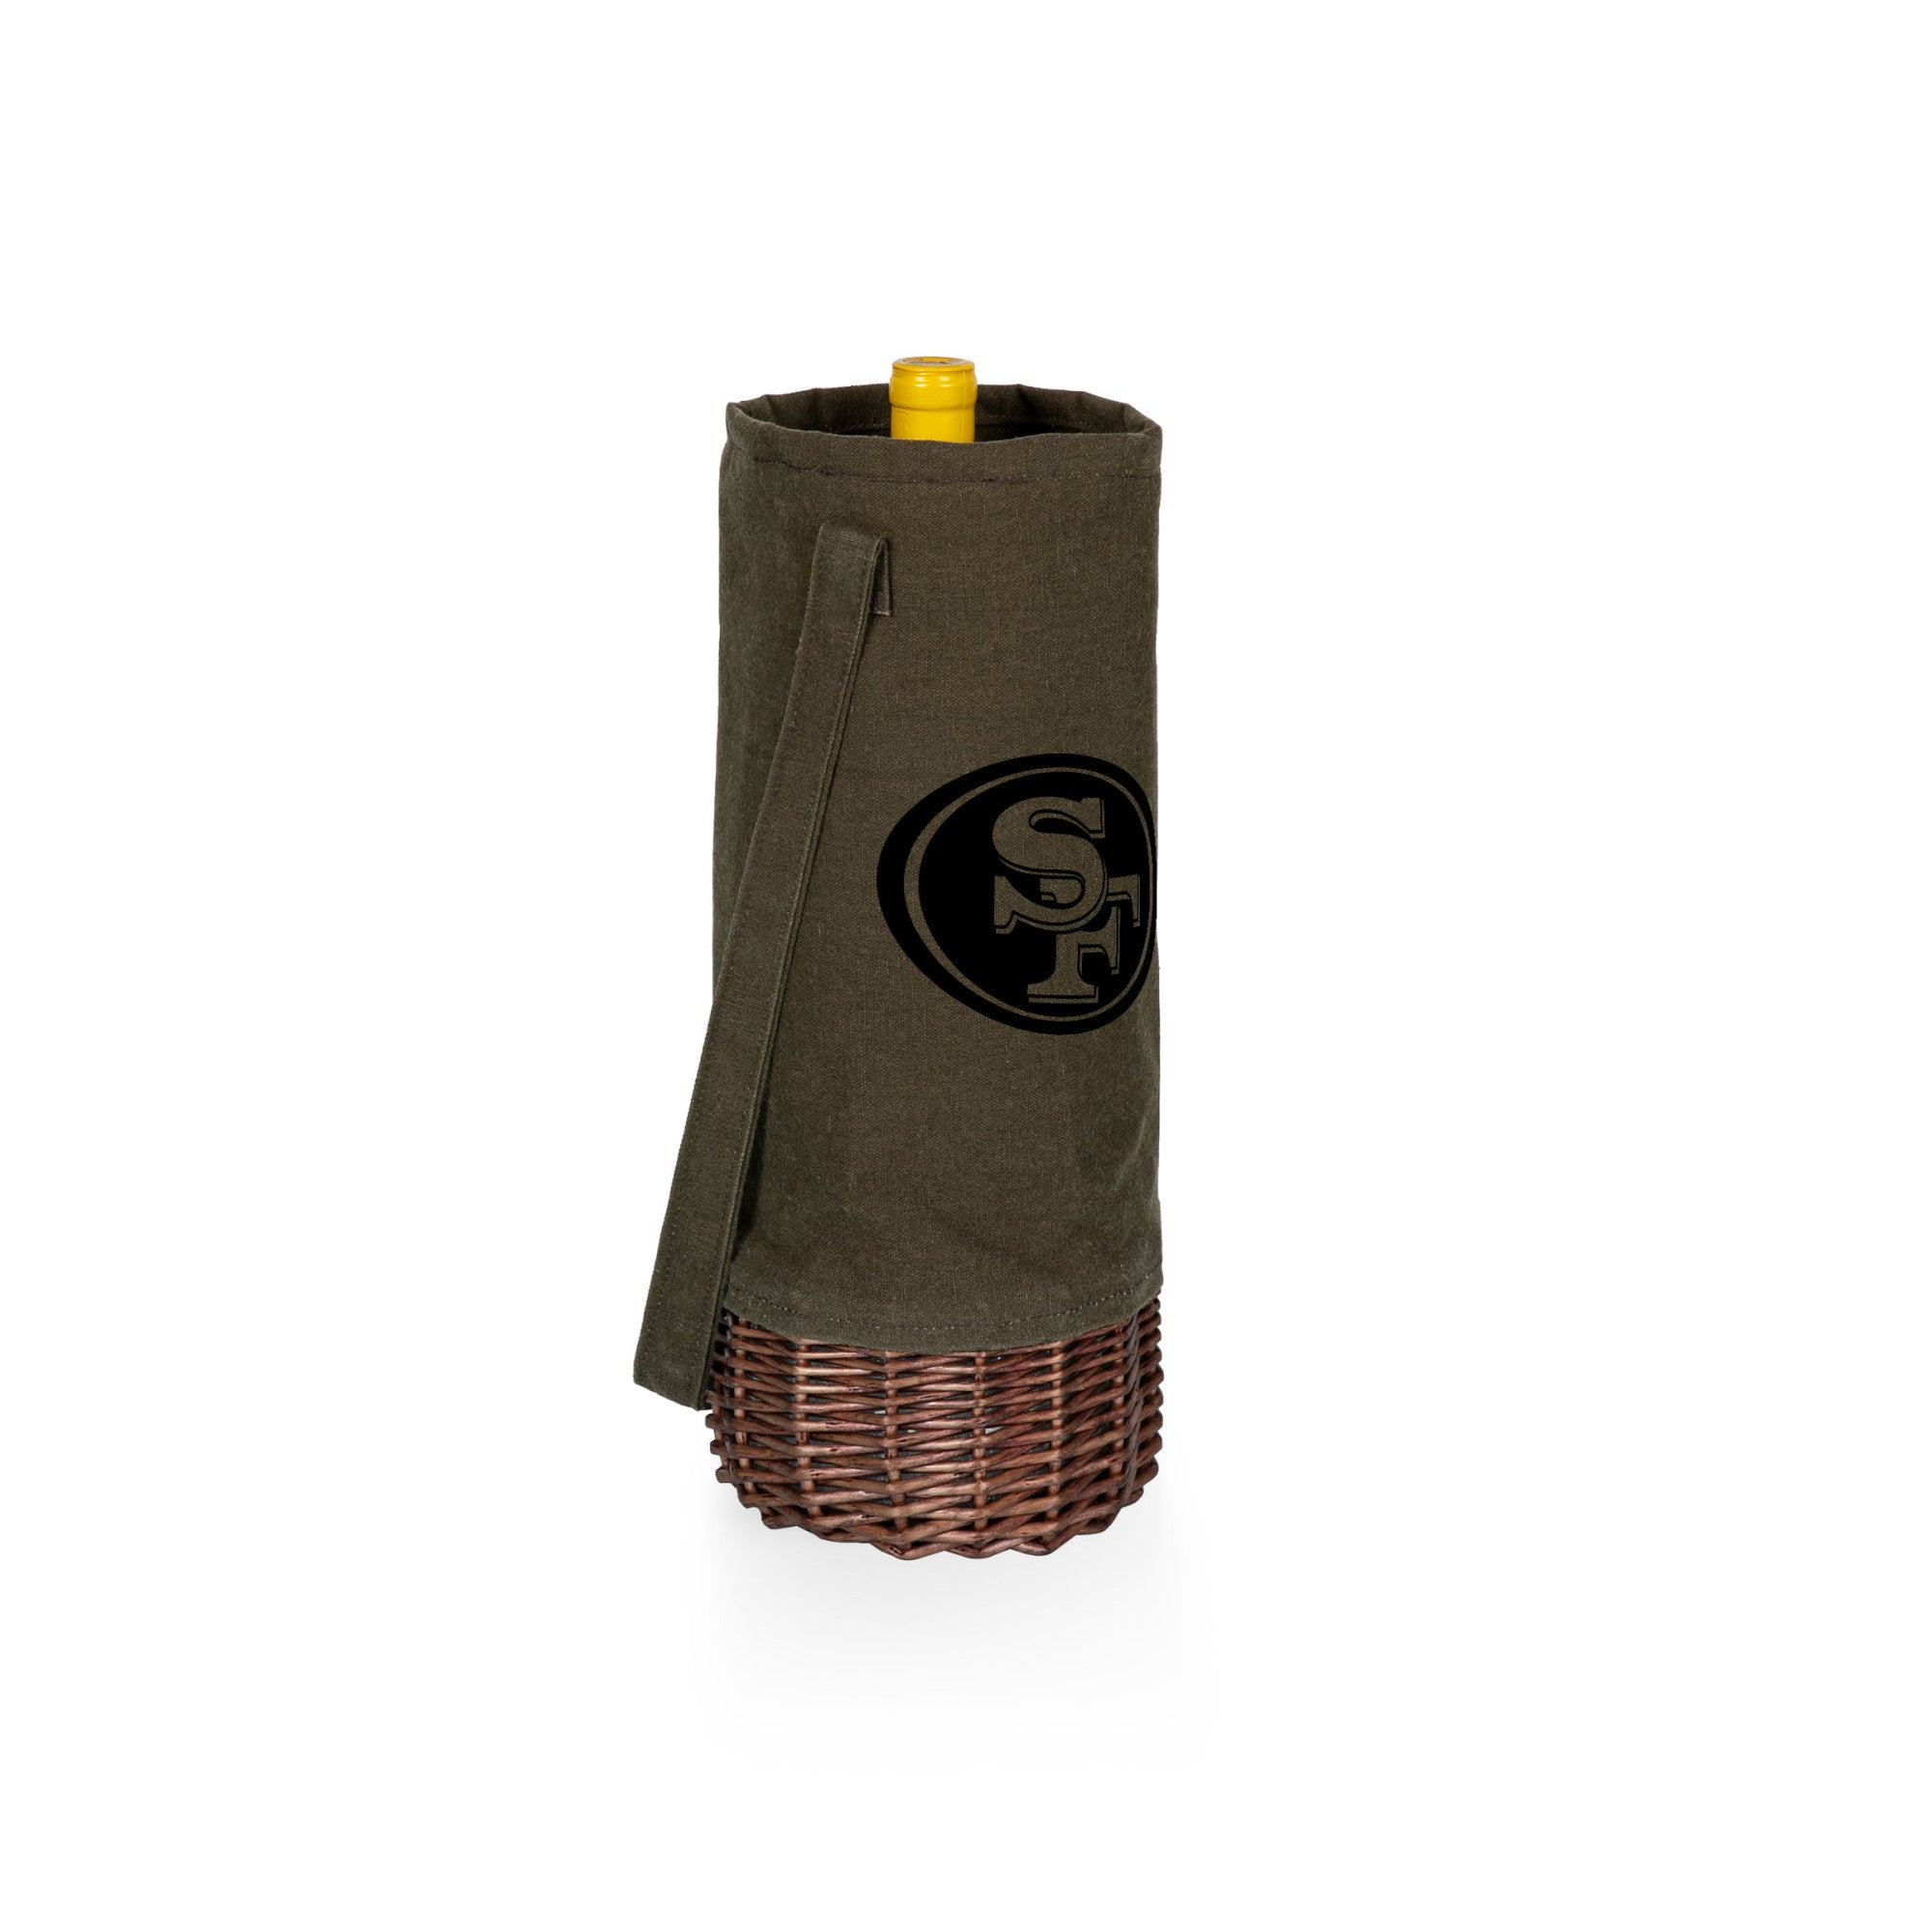 San Francisco 49ers - Malbec Insulated Canvas and Willow Wine Bottle Basket